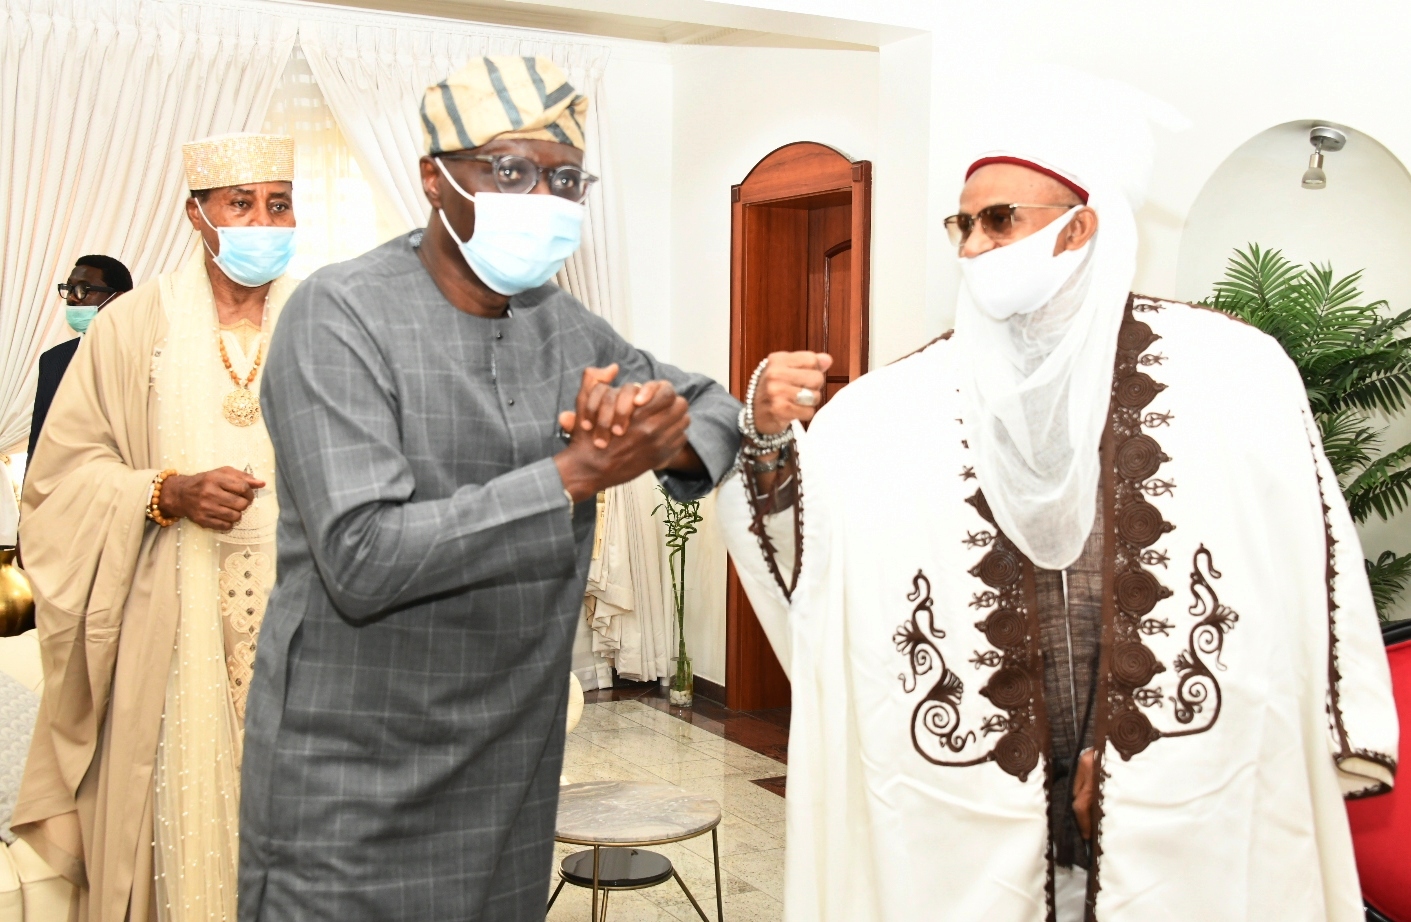 Lagos State Governor, Mr. Babajide Sanwo-Olu (left) exchanging greetings with Etsu Nupe, Alhaji Yahaya Abubakar (right) during a solidarity visit by the National Council of Traditional Rulers of Nigeria, at Lagos House, Marina, on Wednesday, December 2, 2020. Behind is Olugbo of Ugbo, Oba Fredrick Obateru Akinruntan.